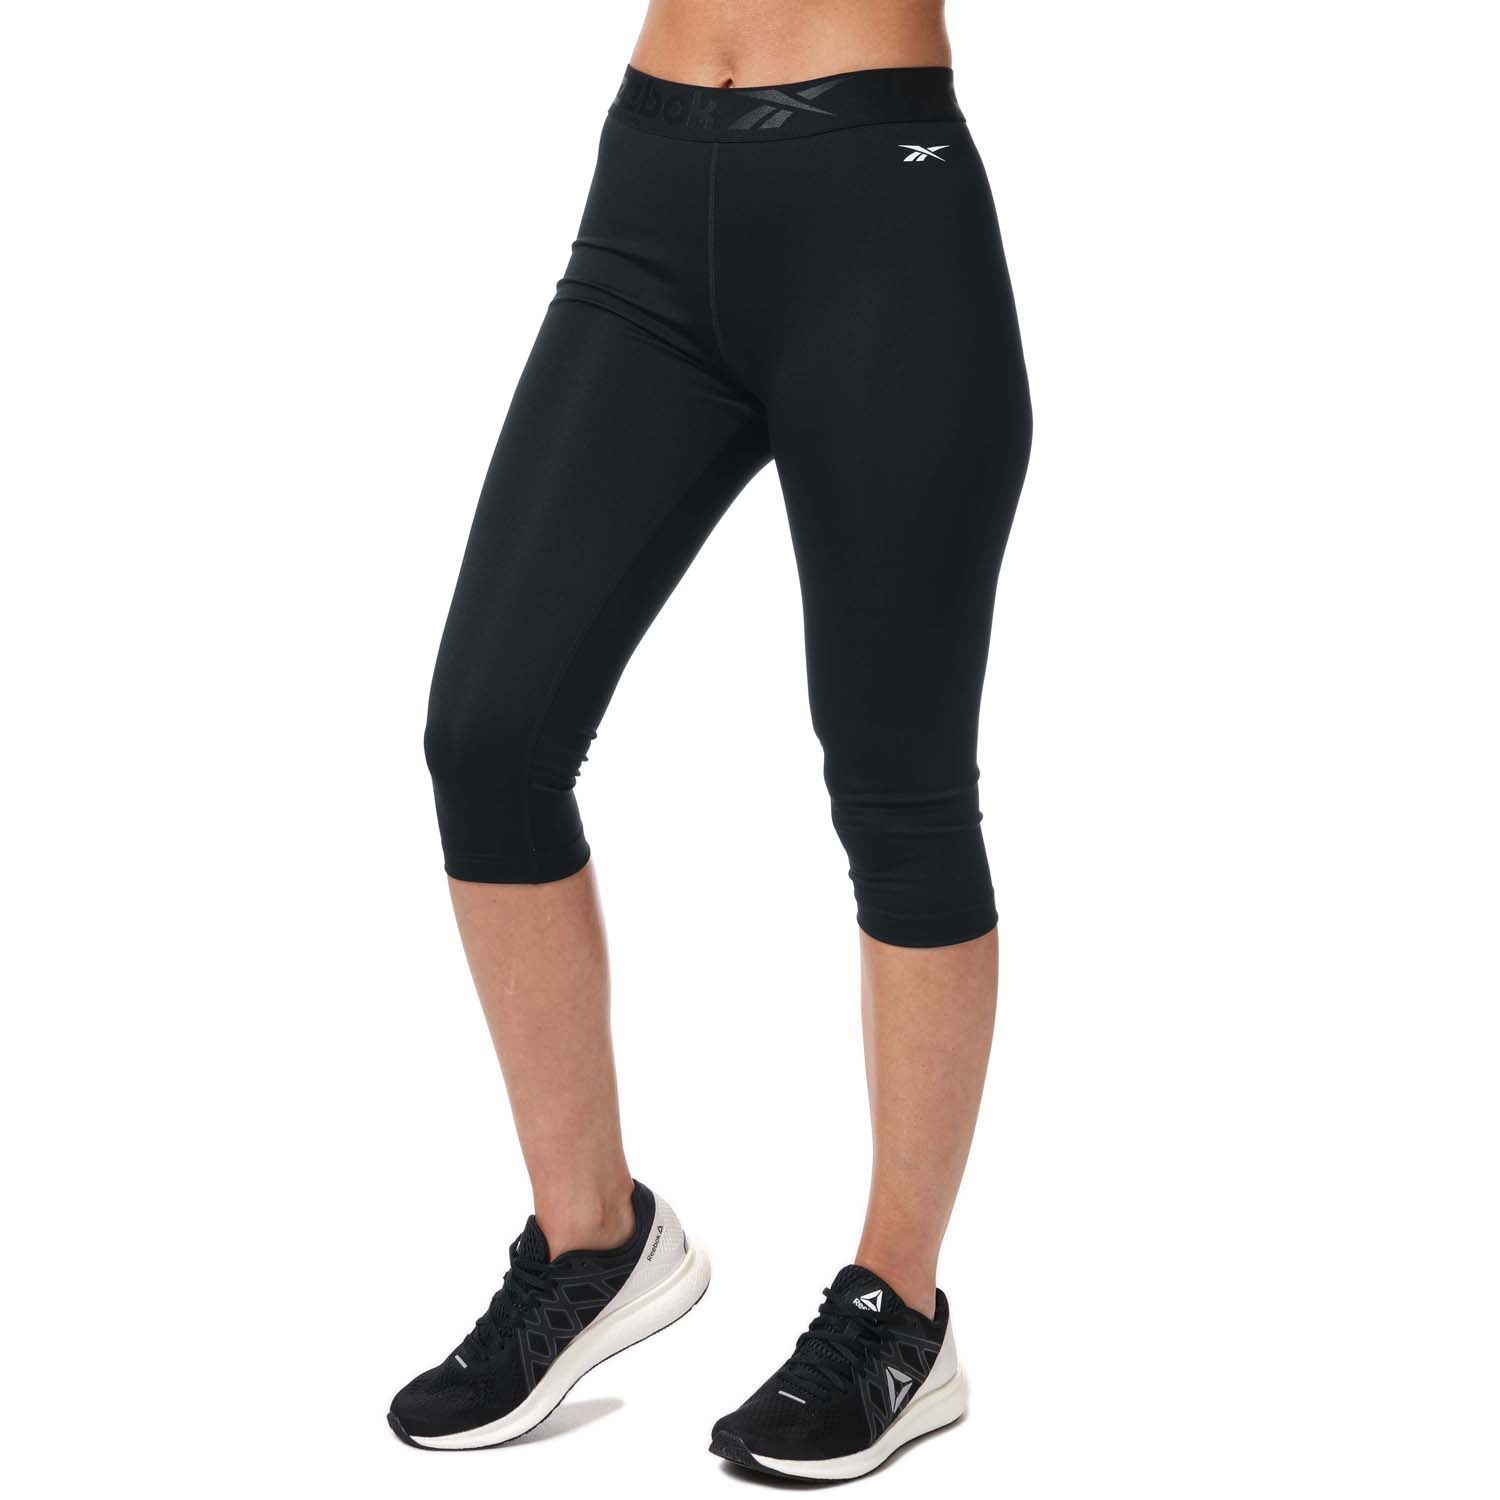 Womens Reebok Workout Ready Capri Tights in black.- Wide waistband and Reebok graphic.- Moisture-wicking fabric.- Reebok branding.- Fitted fit.- Main material: 91% Polyester  9% Elastane.  Machine washable. - Ref: FQ0405